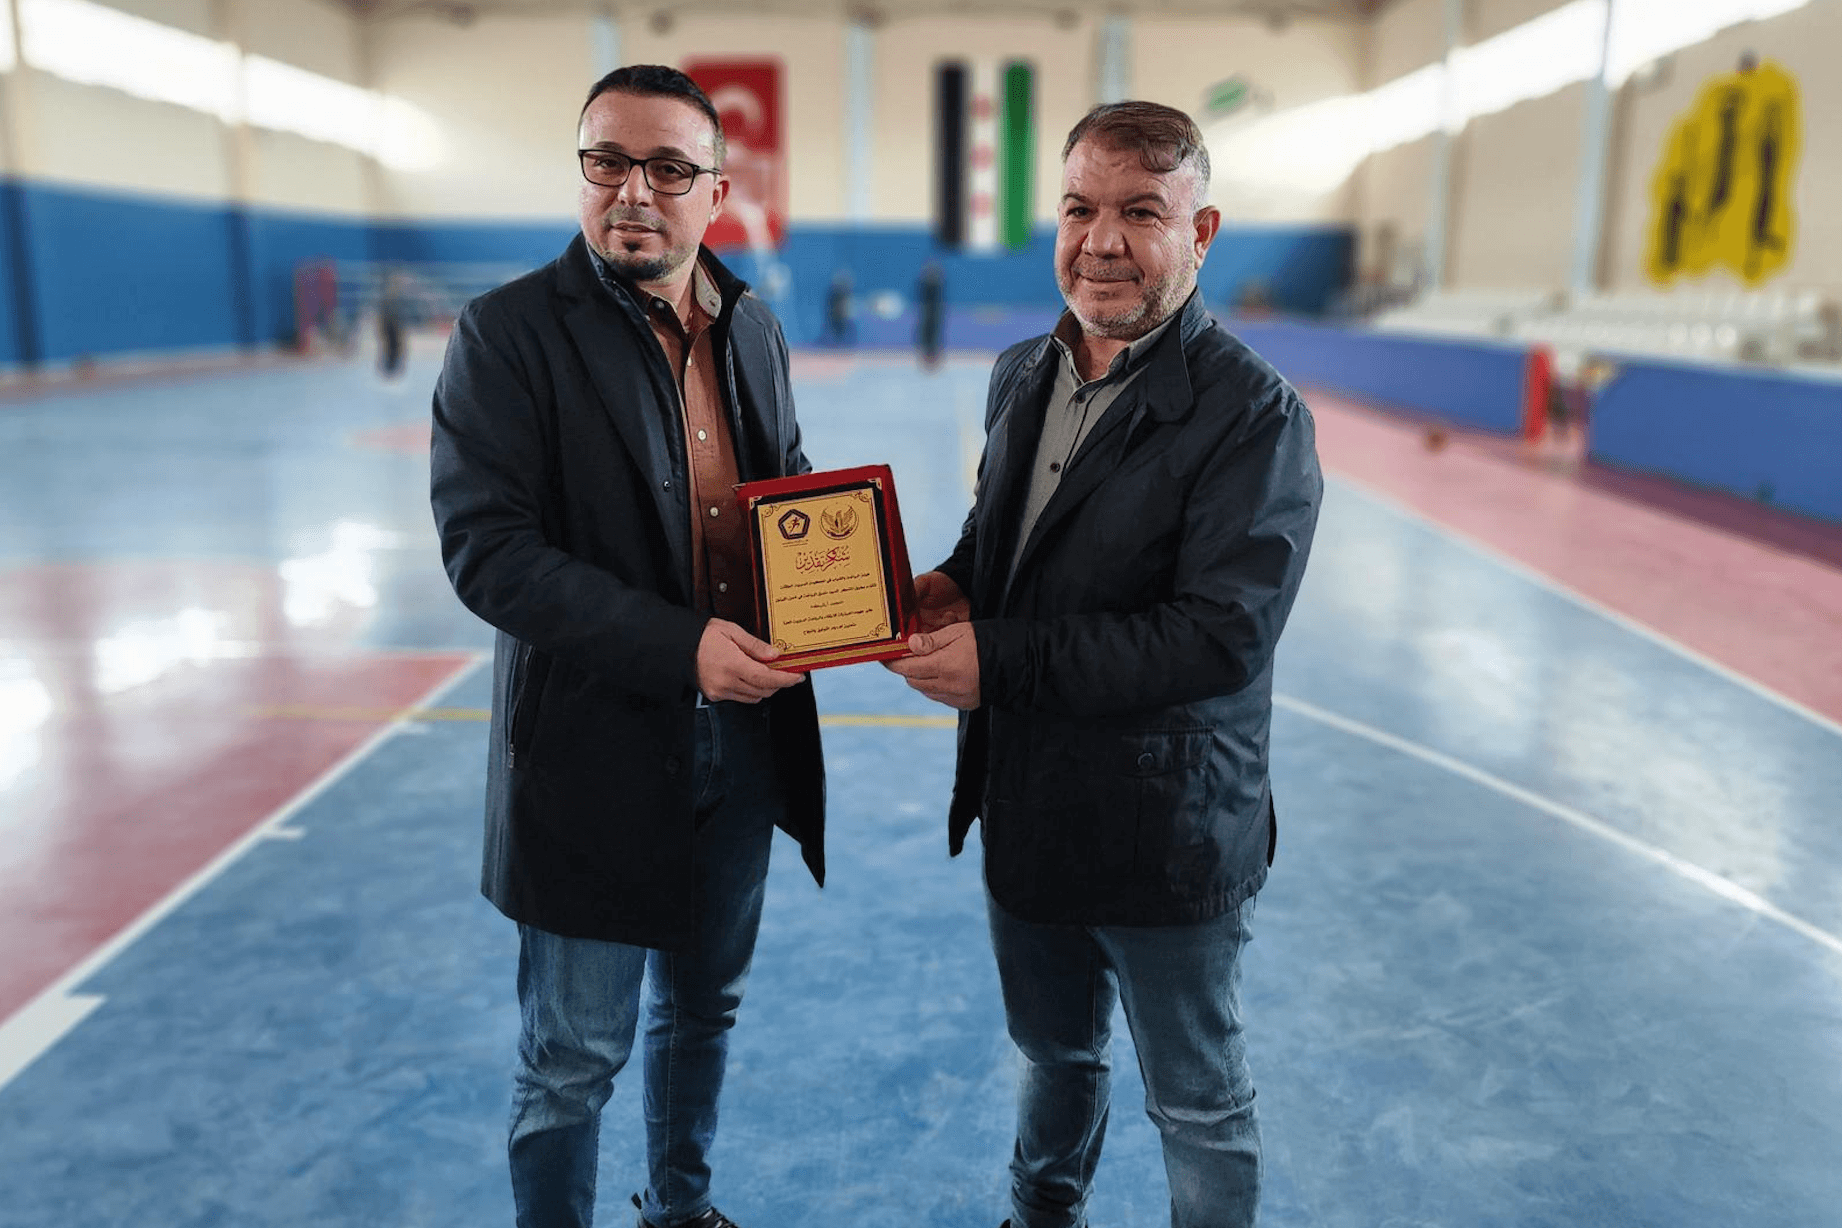 SOC’s Vice-president Barakat Visits Sports Facilities in Afrin for Inspection